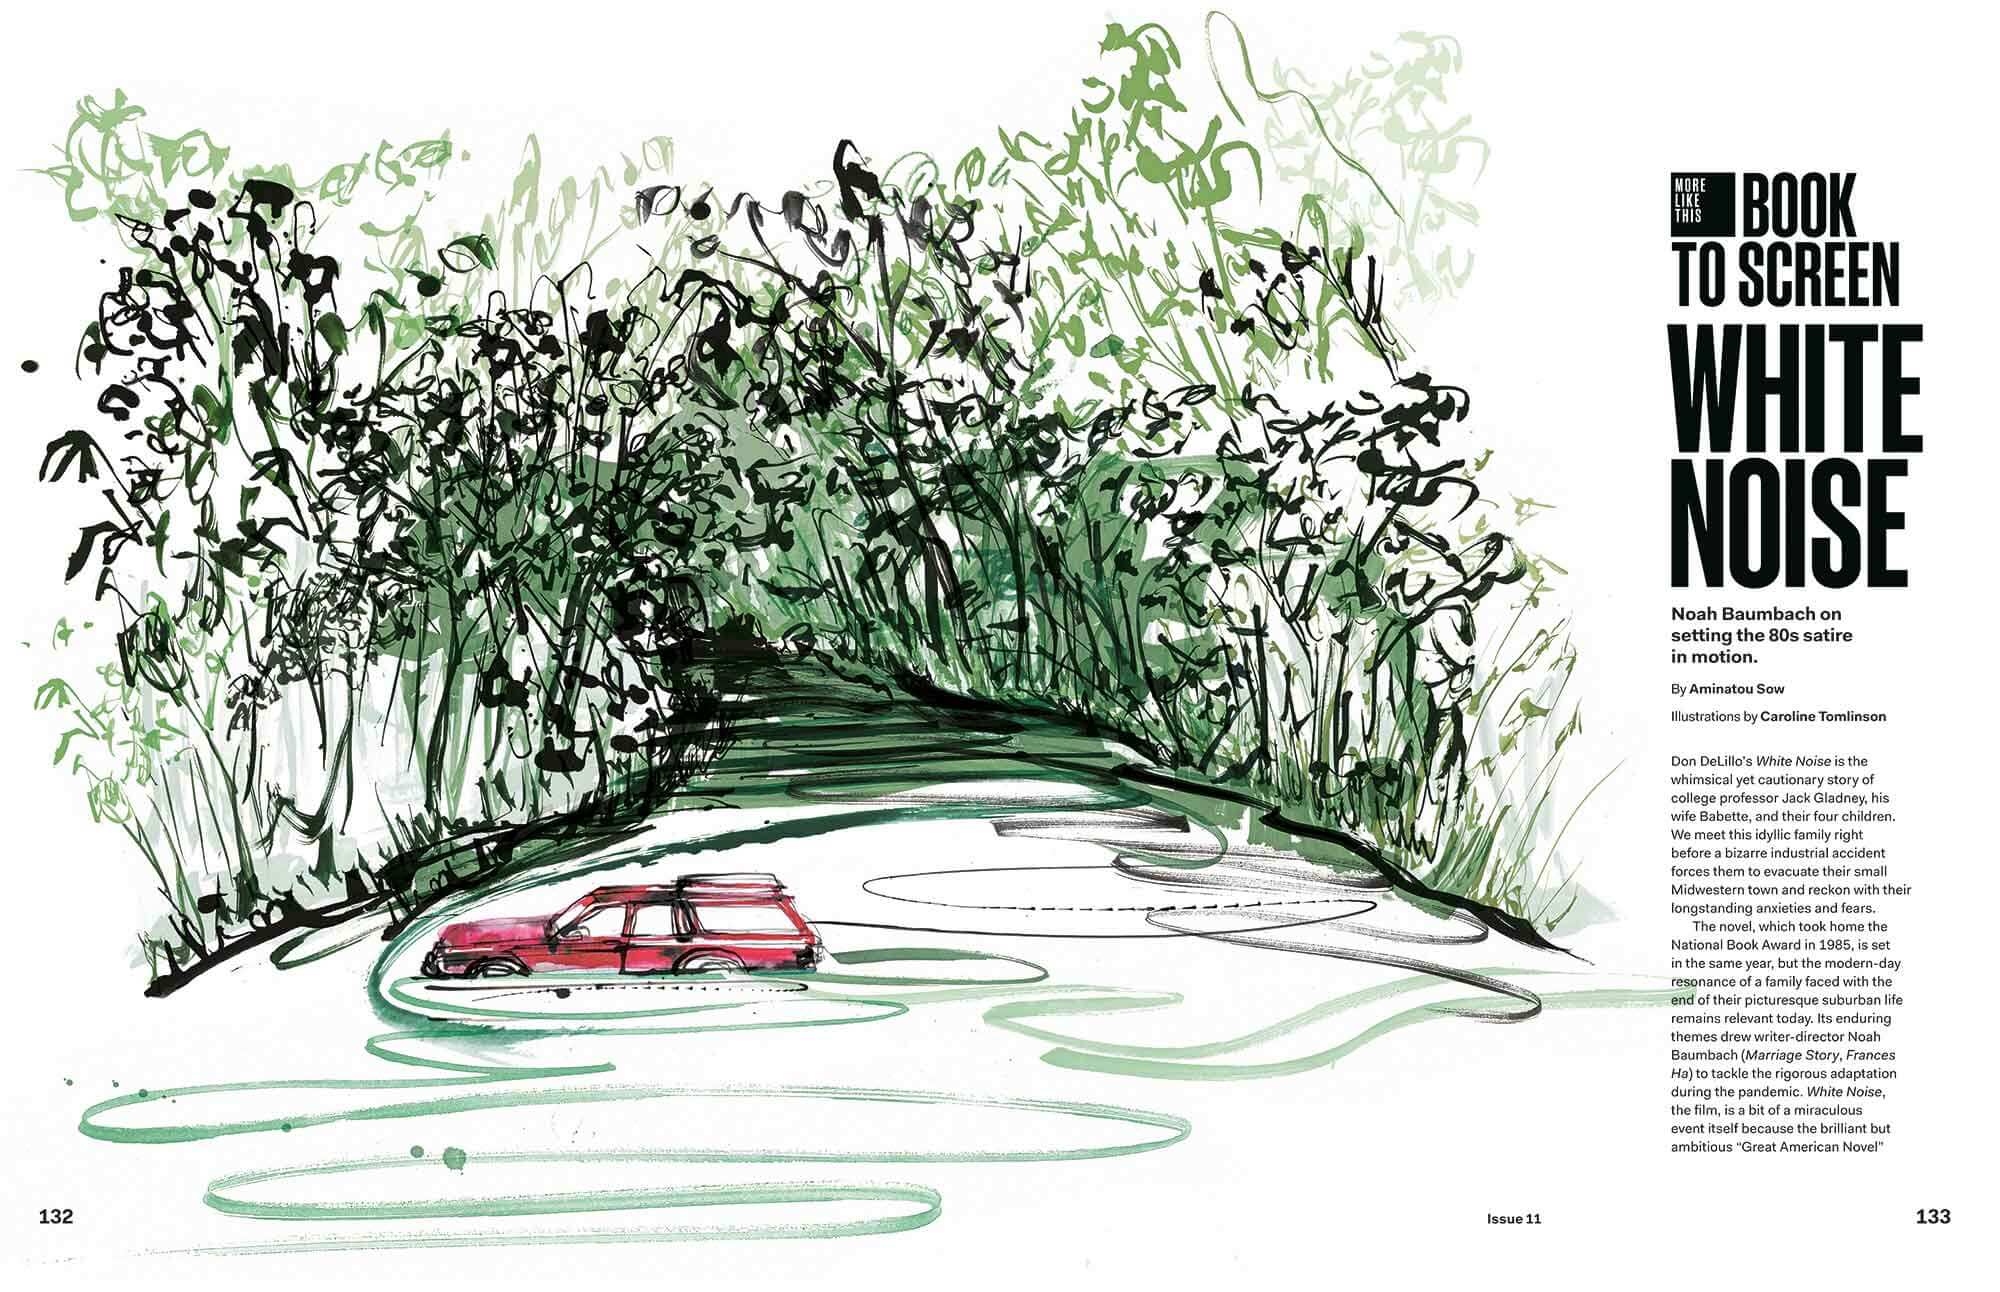 Book to film editorial illustration for Netflix White Noise. Landscape of a car floating in a river. Energetic brushstrokes illustrated in ink and watercolour.